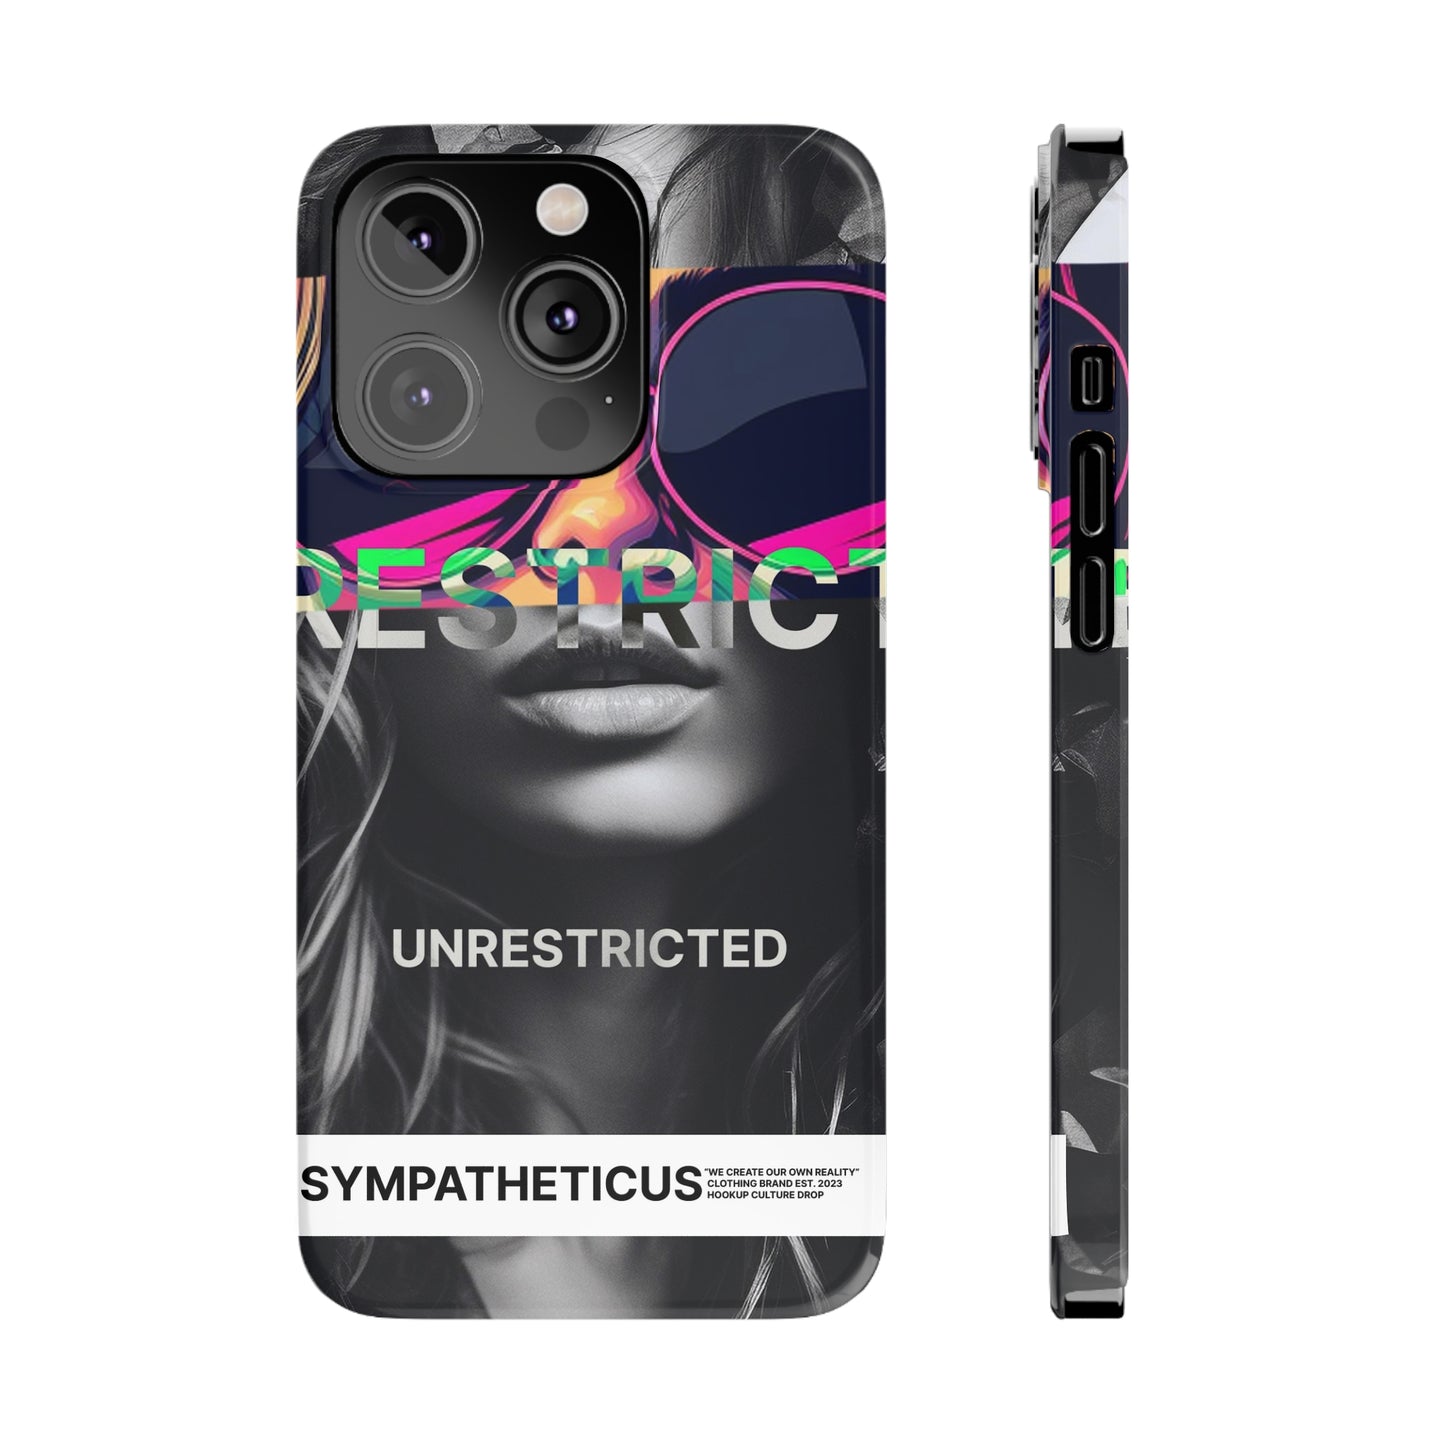 Hookup culture special iphone case-07